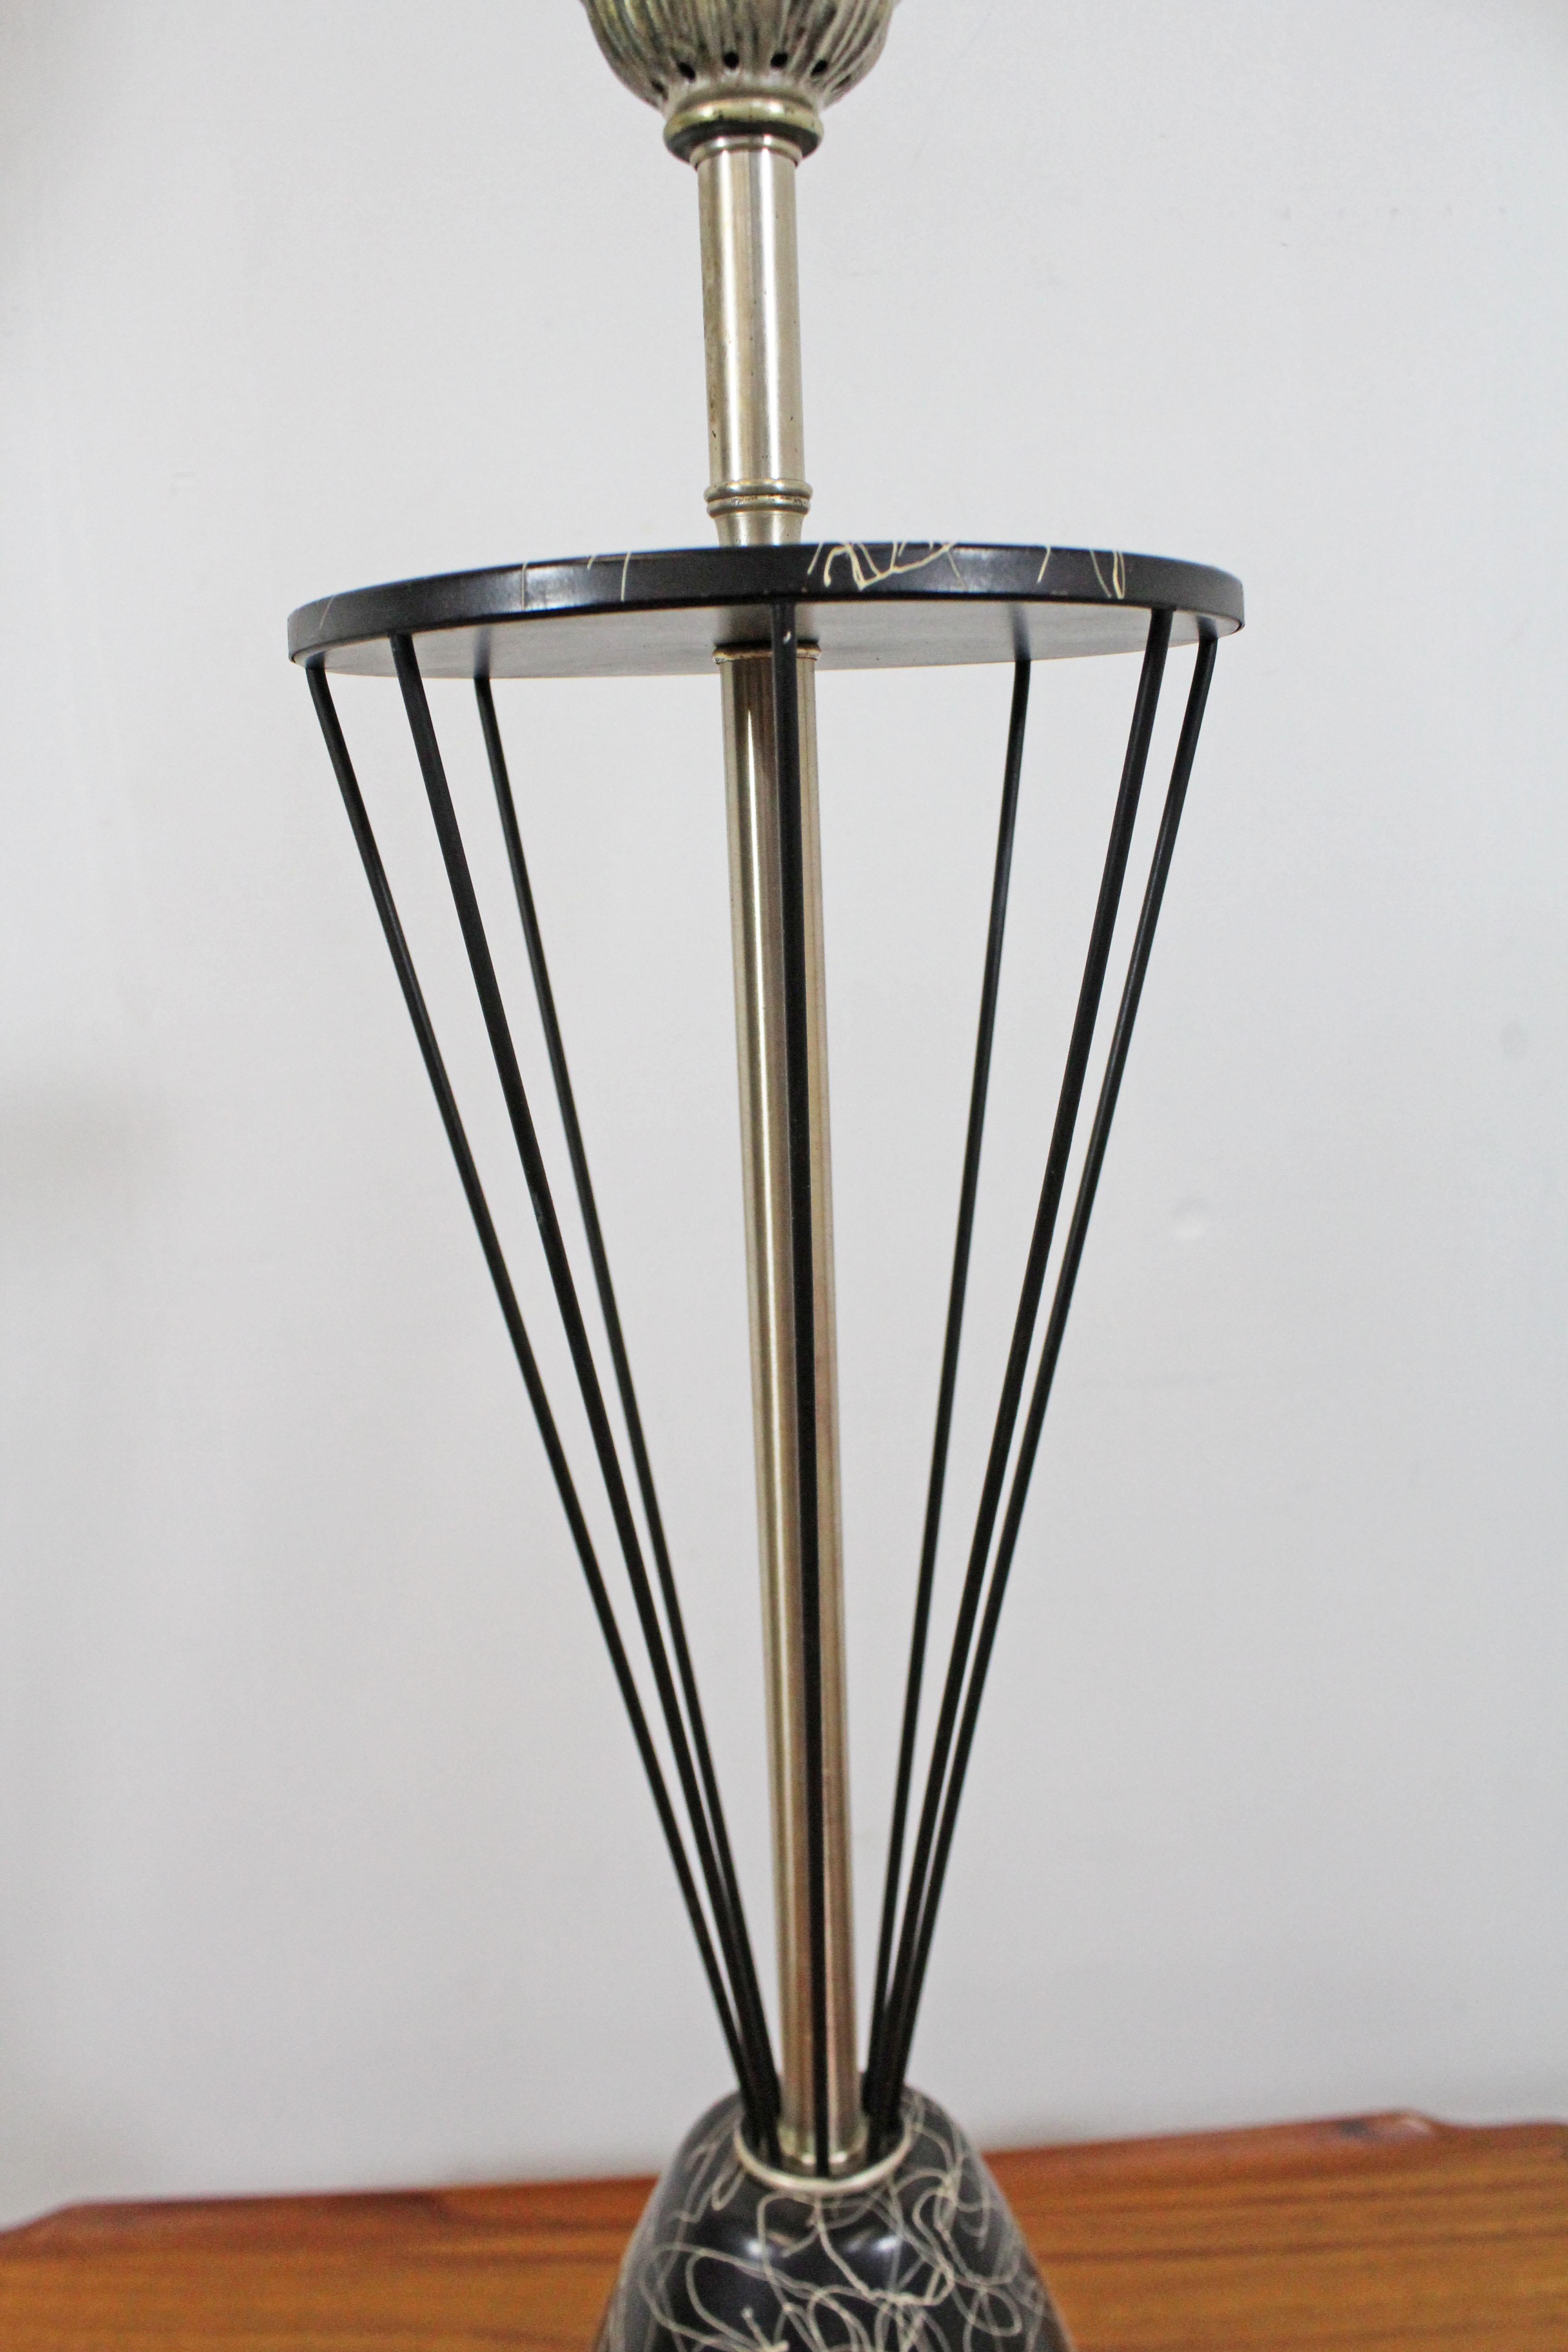 Mid-Century Modern Caged Wire Base Drum Shade Painted Tall Table Lamp In Good Condition For Sale In Wilmington, DE